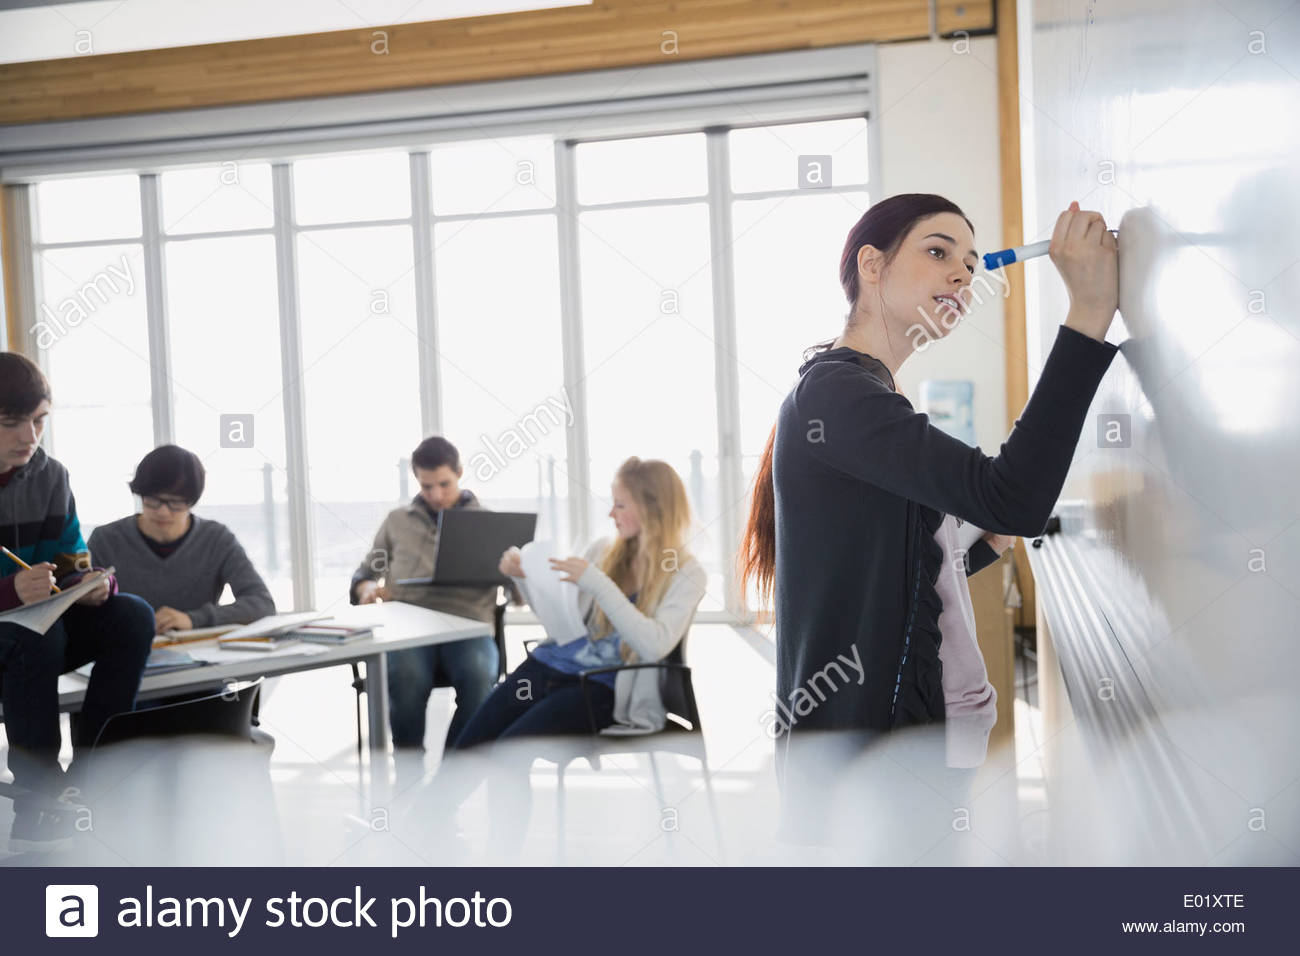 High school student at whiteboard in classroom Stock Photo